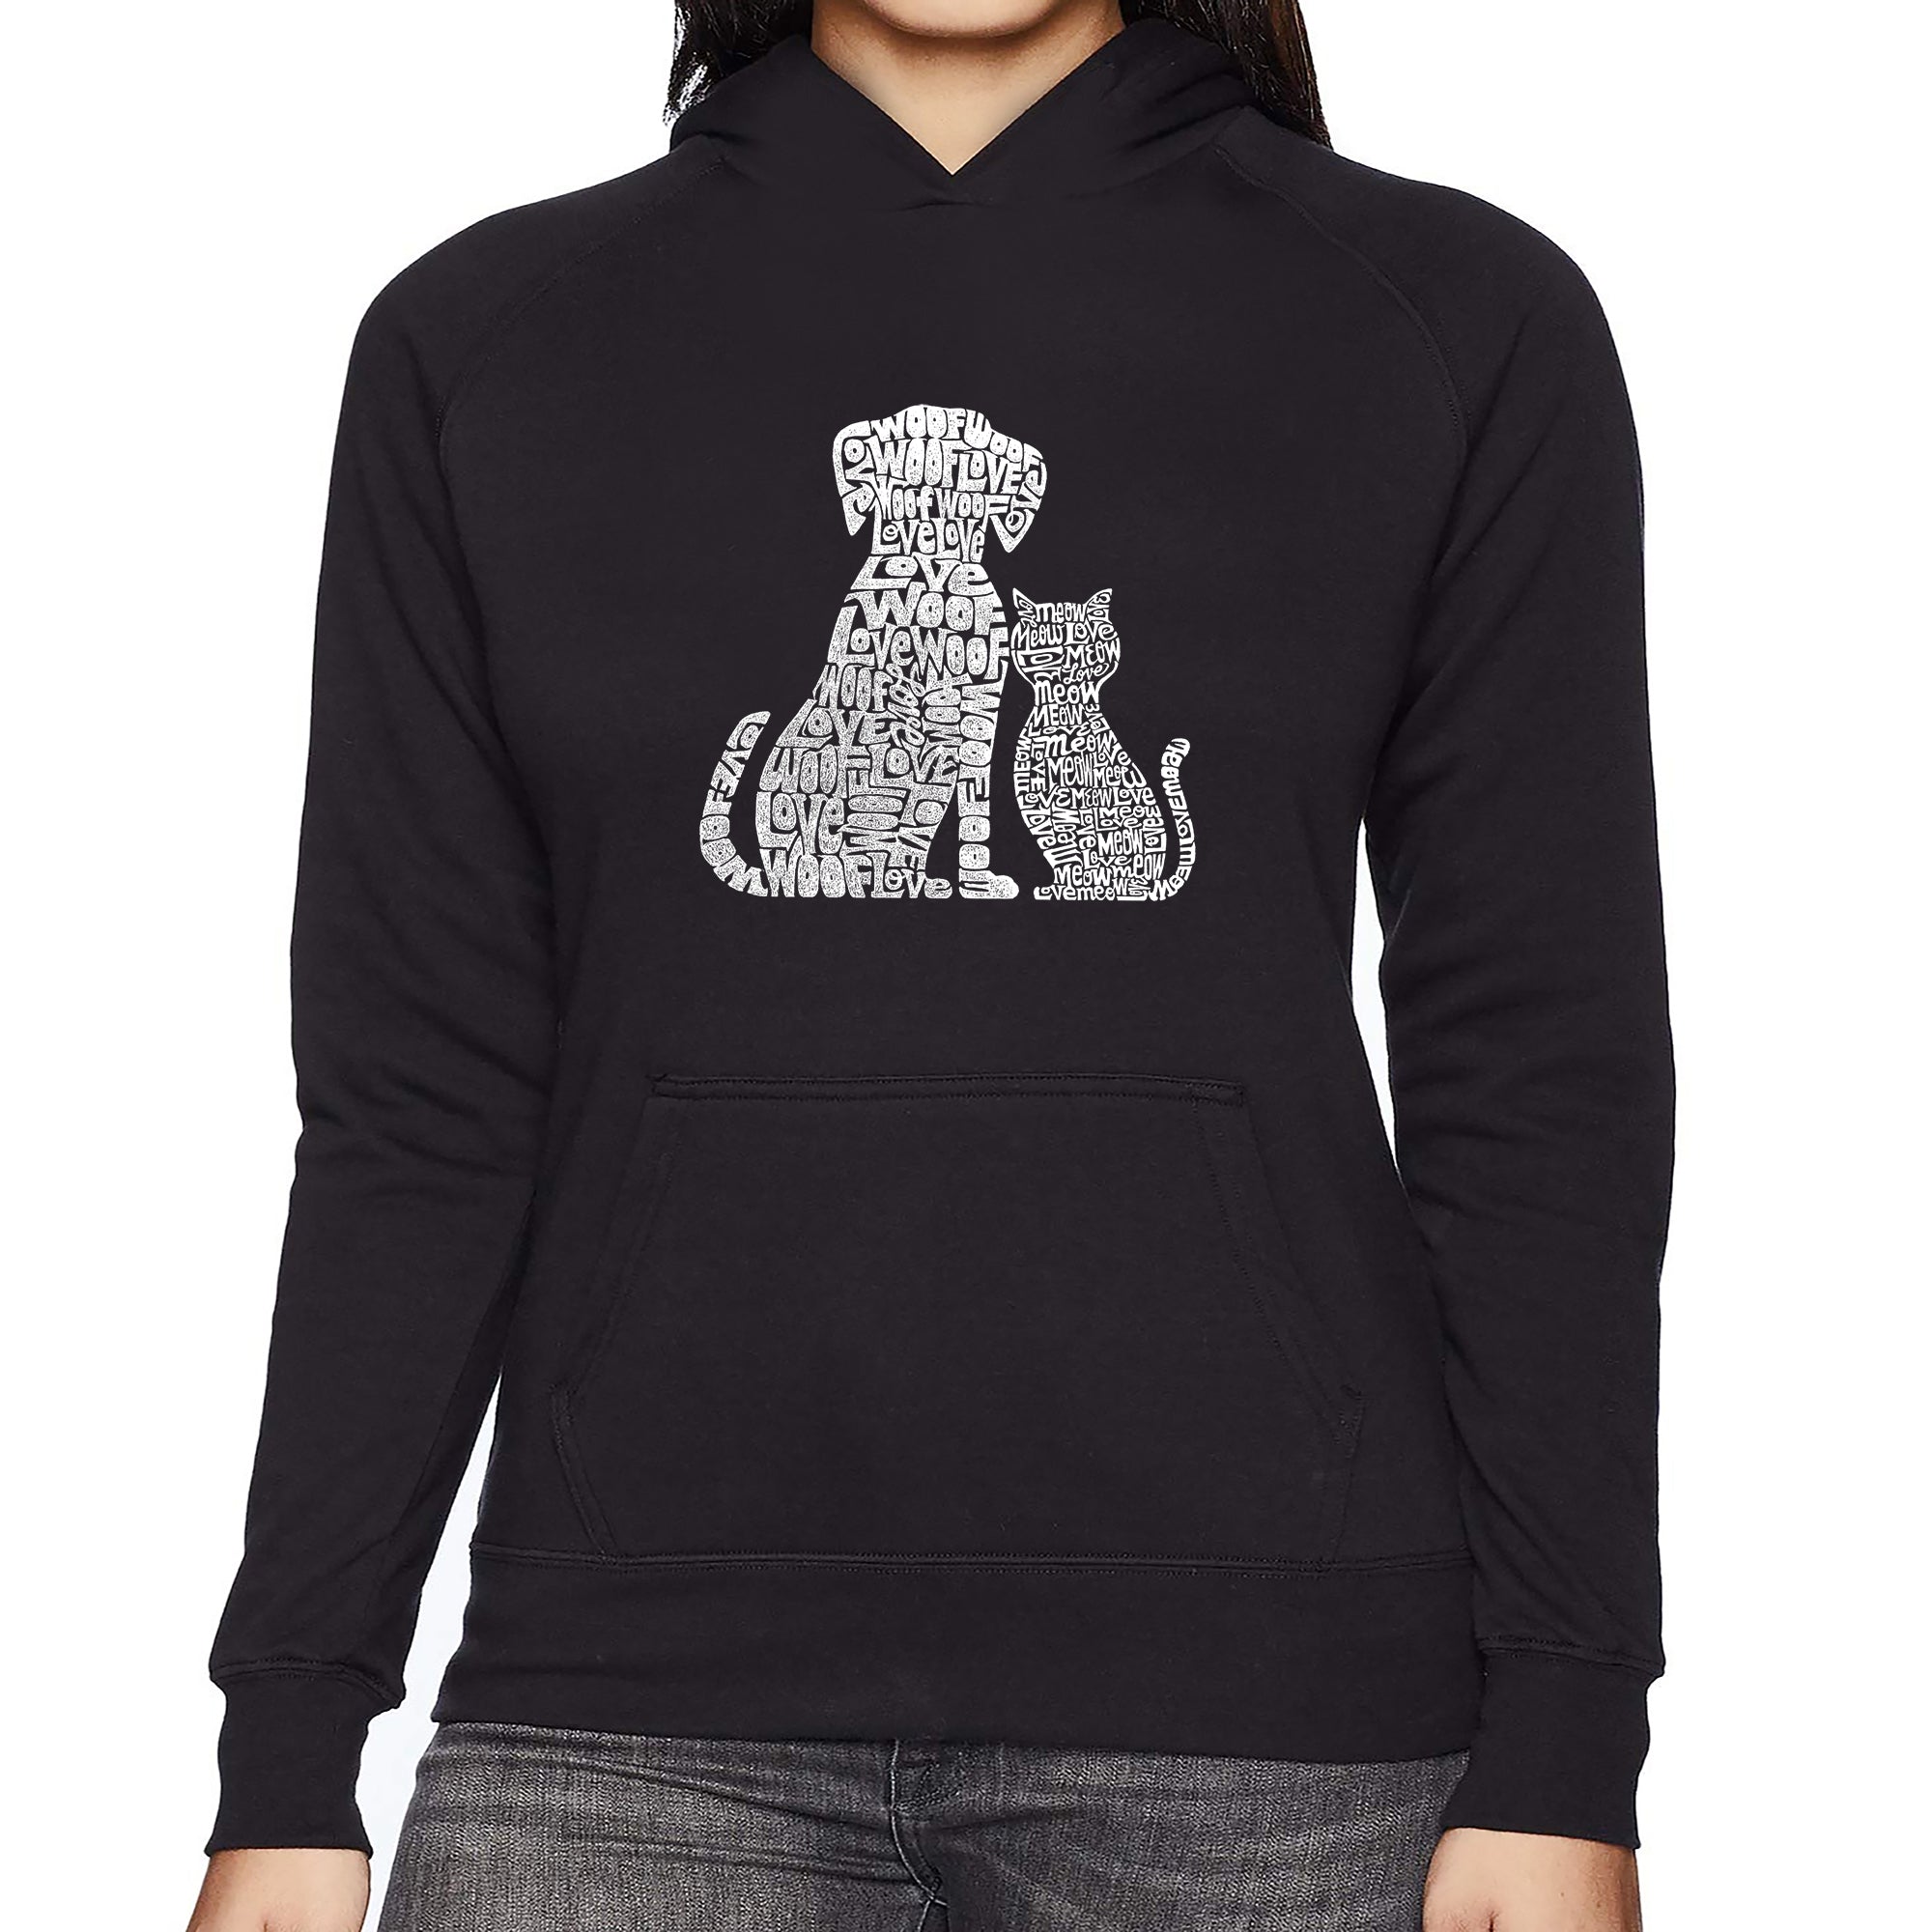 Dogs And Cats - Women's Word Art Hooded Sweatshirt - Black - X-Large